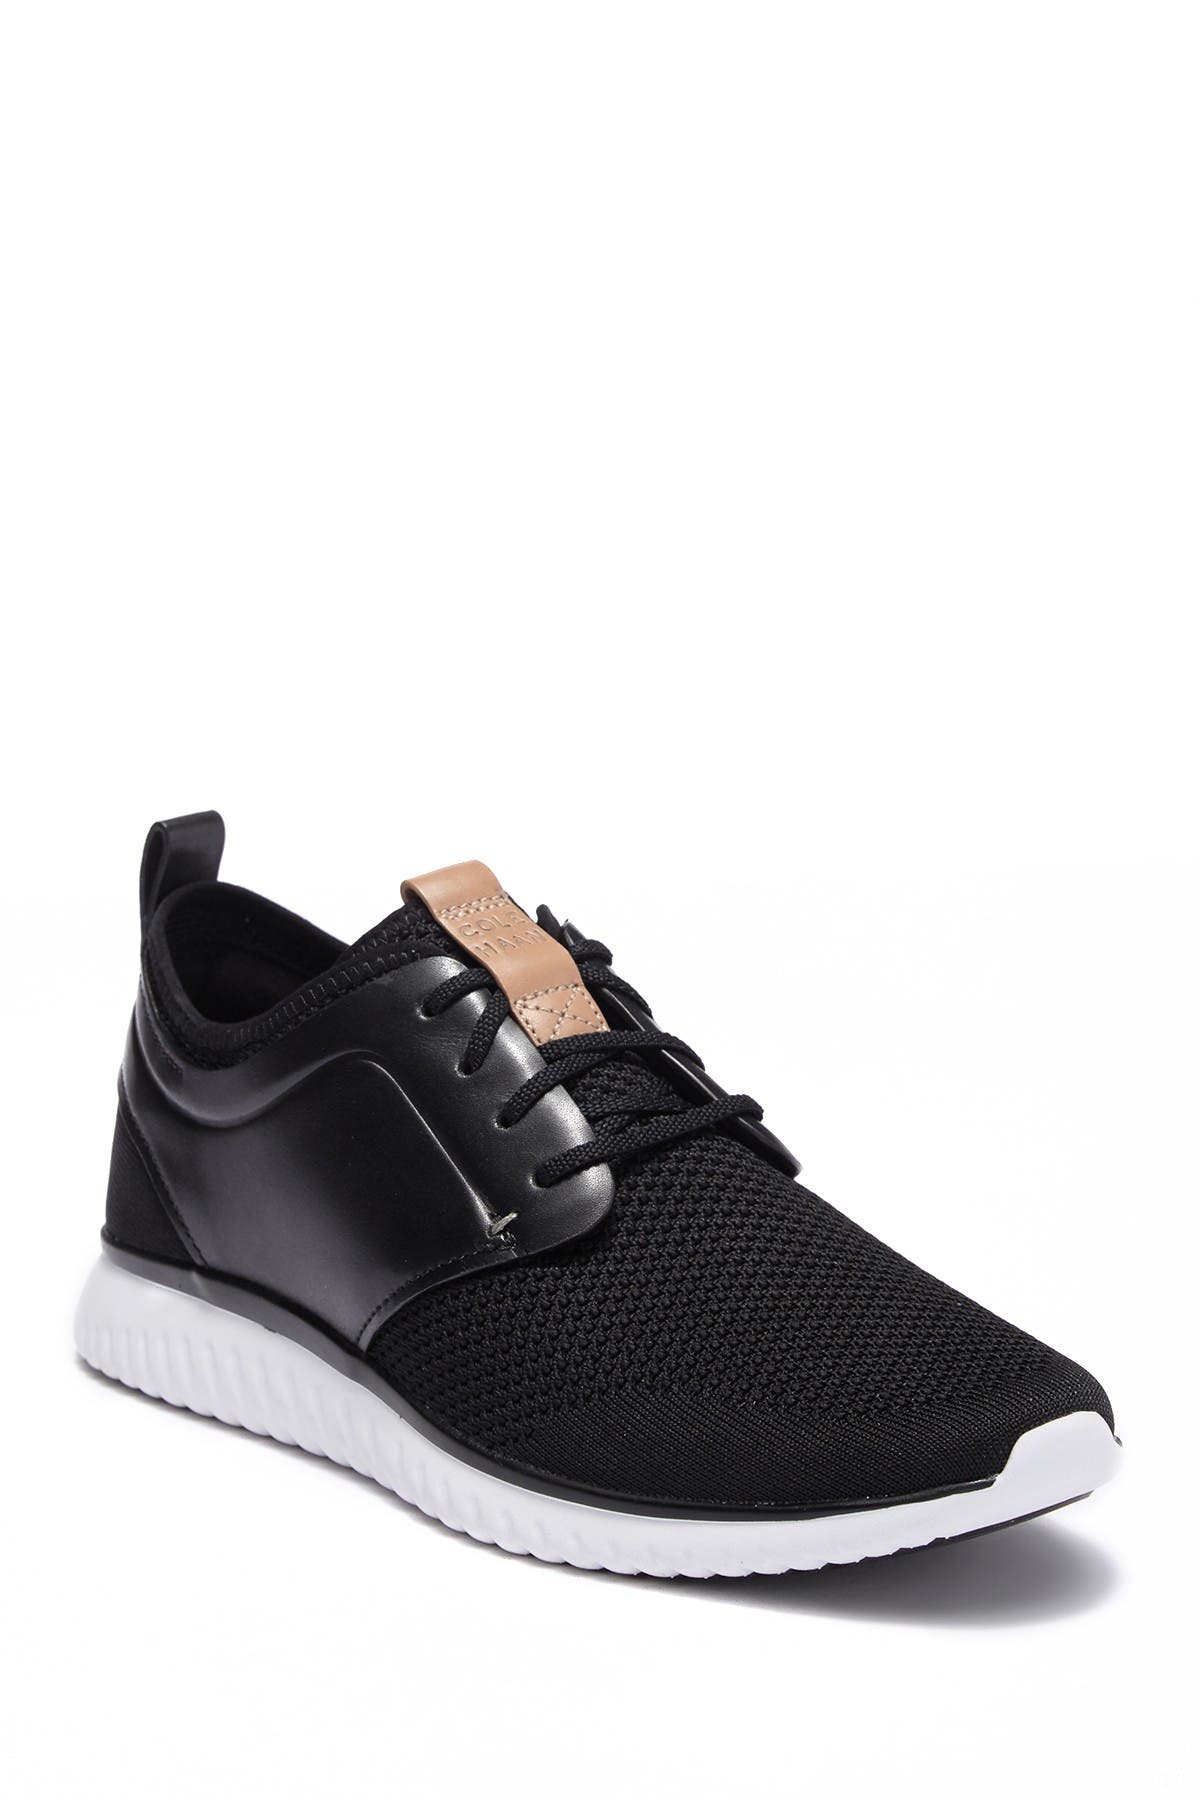 cole haan grand motion saddle knit sneaker